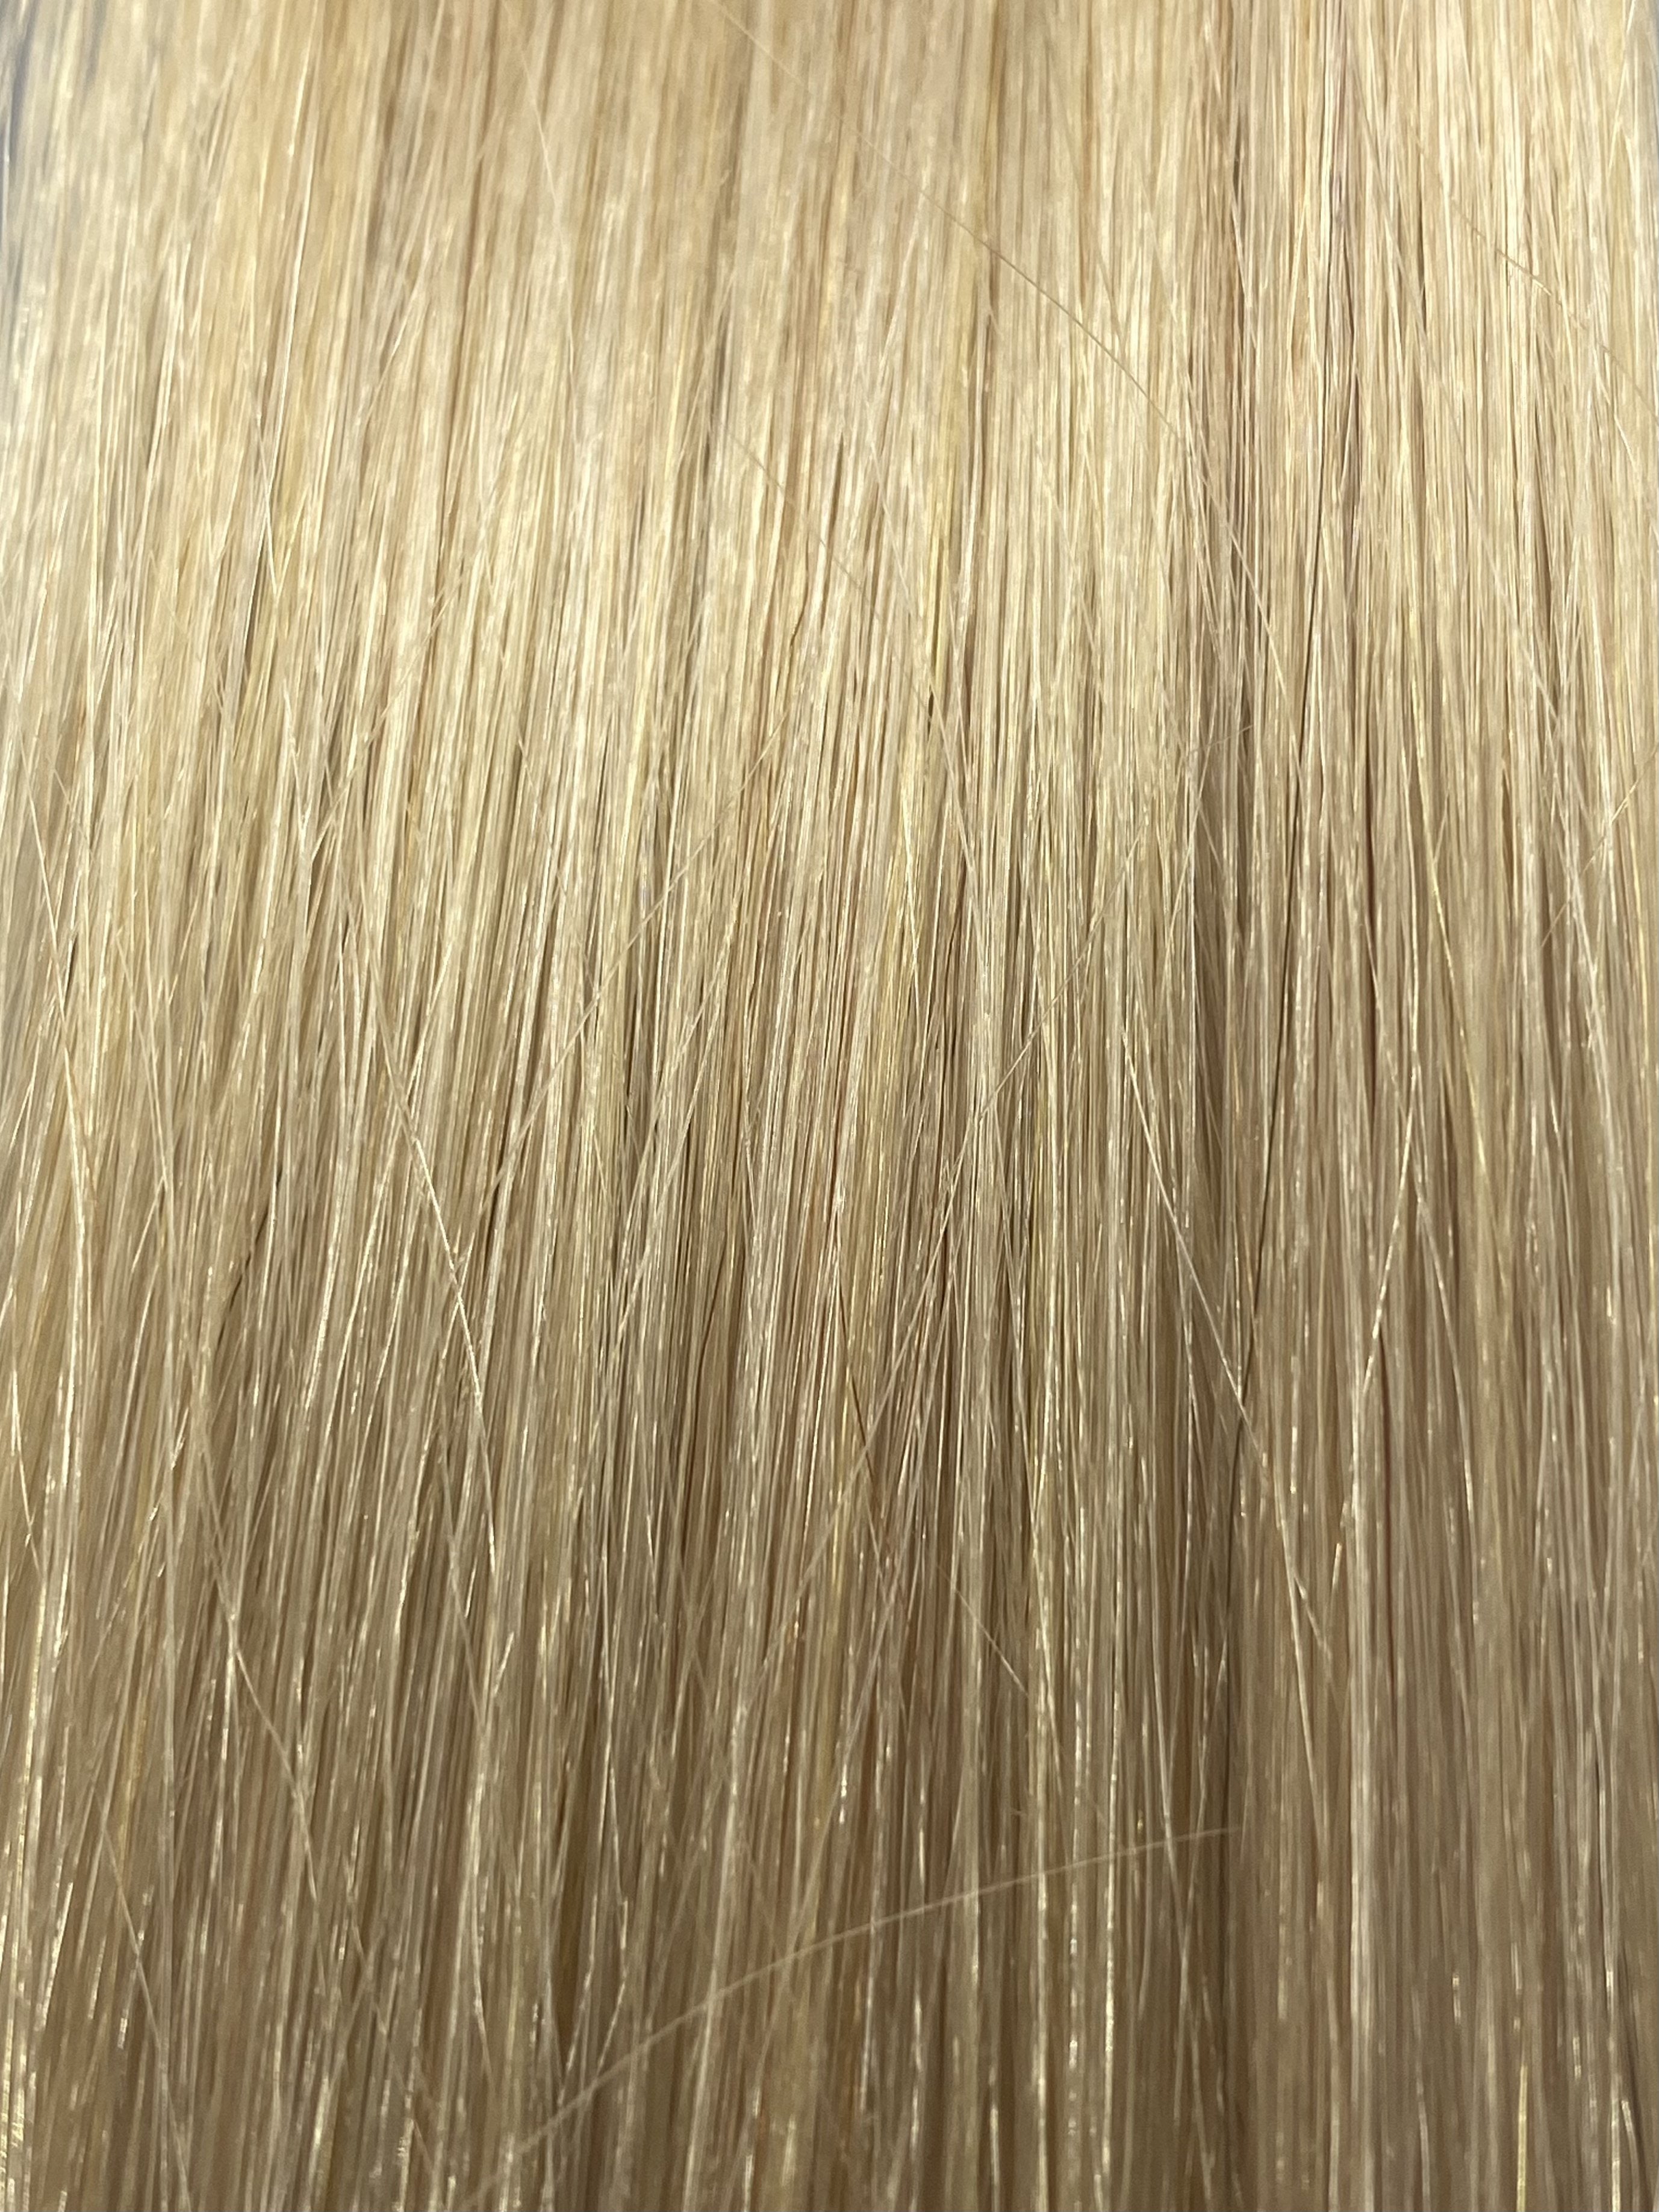 FUSION #1002 VERY LIGHT ASH BLONDE 40CM/ 16 INCHES  - 17.5 GRAMS - Image 1